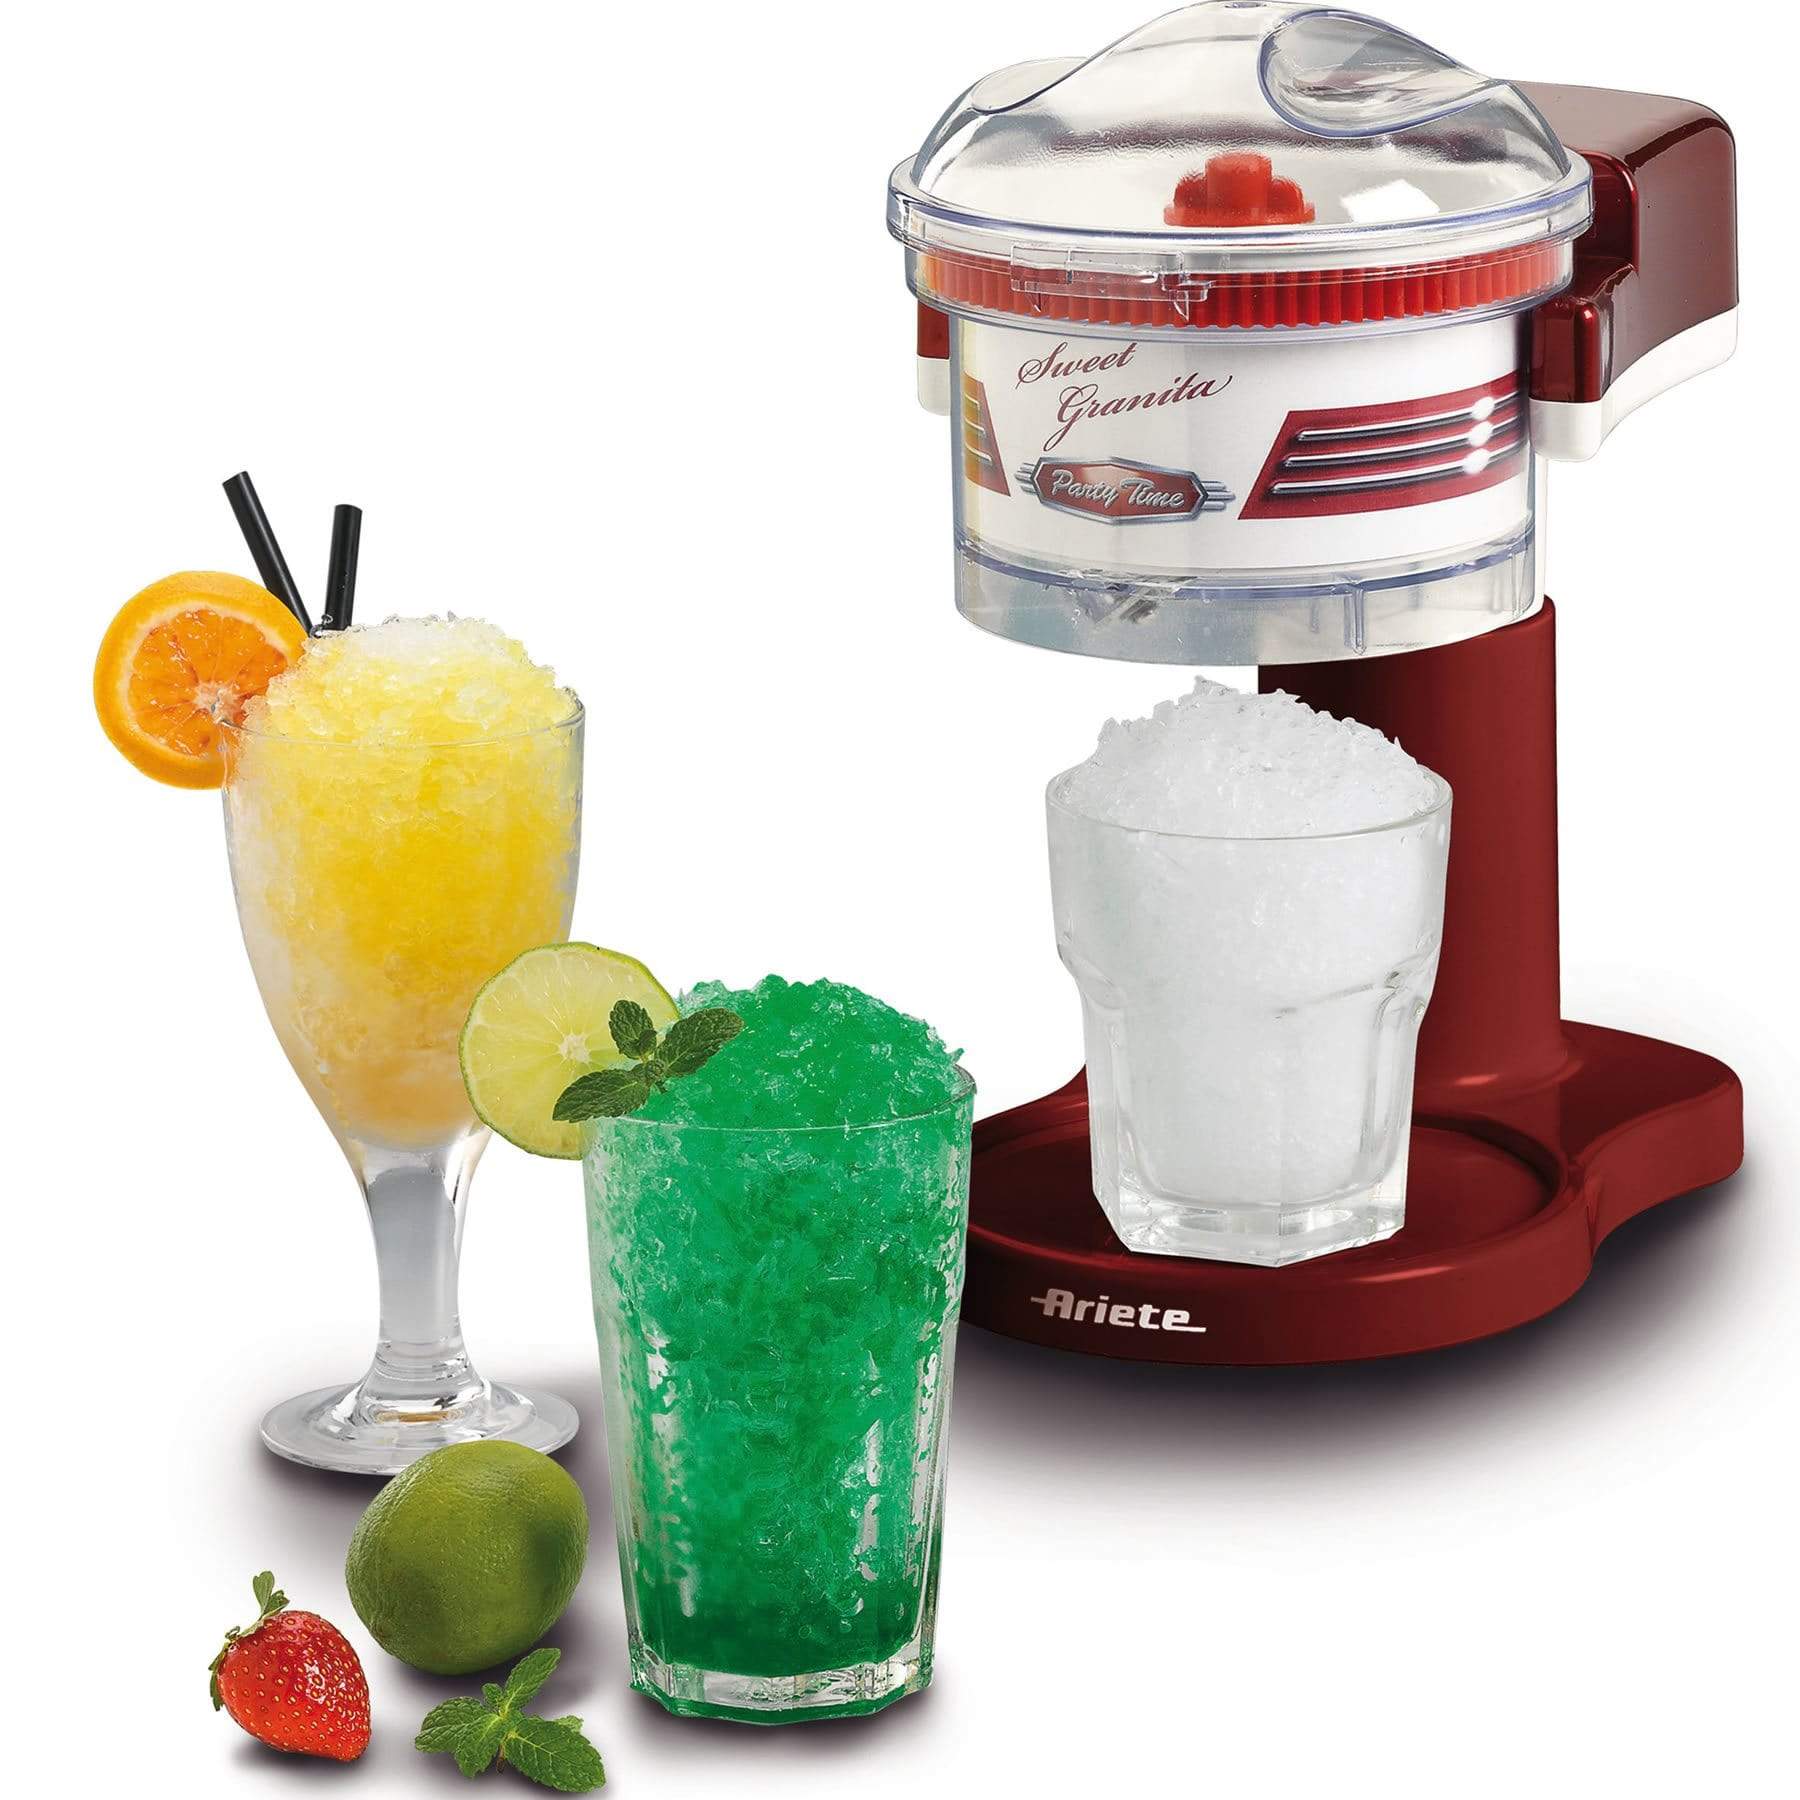 Order Ariete Party Time Granita Maker, Red 0078 Now!